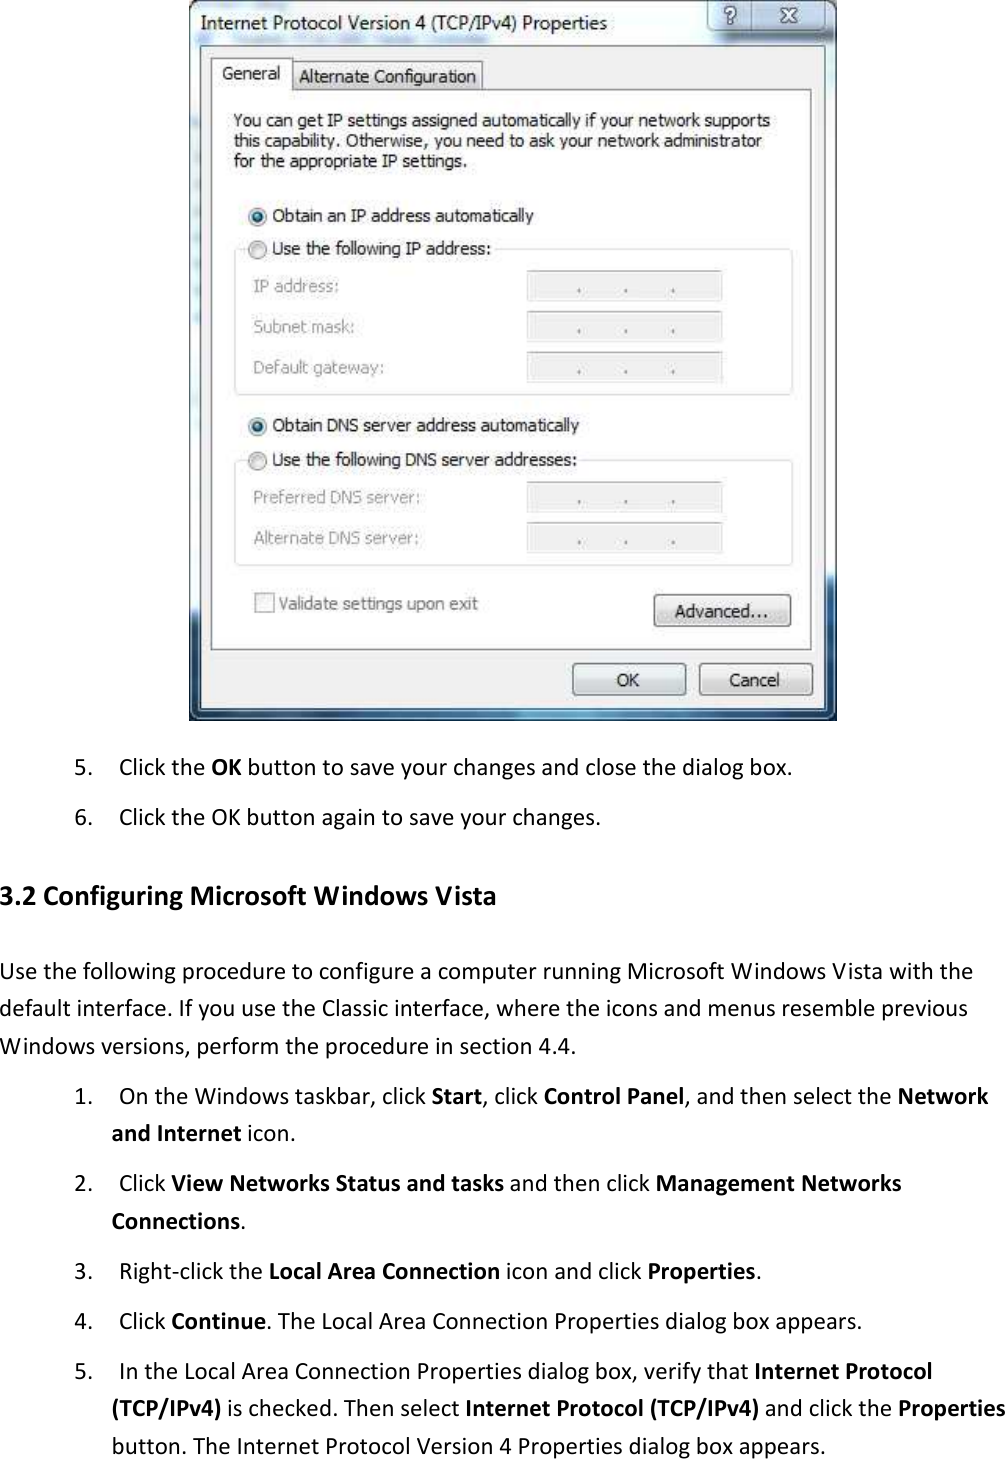  5. Click the OK button to save your changes and close the dialog box. 6. Click the OK button again to save your changes. 3.2 Configuring Microsoft Windows Vista Use the following procedure to configure a computer running Microsoft Windows Vista with the default interface. If you use the Classic interface, where the icons and menus resemble previous Windows versions, perform the procedure in section 4.4. 1. On the Windows taskbar, click Start, click Control Panel, and then select the Network and Internet icon. 2. Click View Networks Status and tasks and then click Management Networks Connections. 3. Right-click the Local Area Connection icon and click Properties. 4. Click Continue. The Local Area Connection Properties dialog box appears. 5. In the Local Area Connection Properties dialog box, verify that Internet Protocol (TCP/IPv4) is checked. Then select Internet Protocol (TCP/IPv4) and click the Properties button. The Internet Protocol Version 4 Properties dialog box appears.  